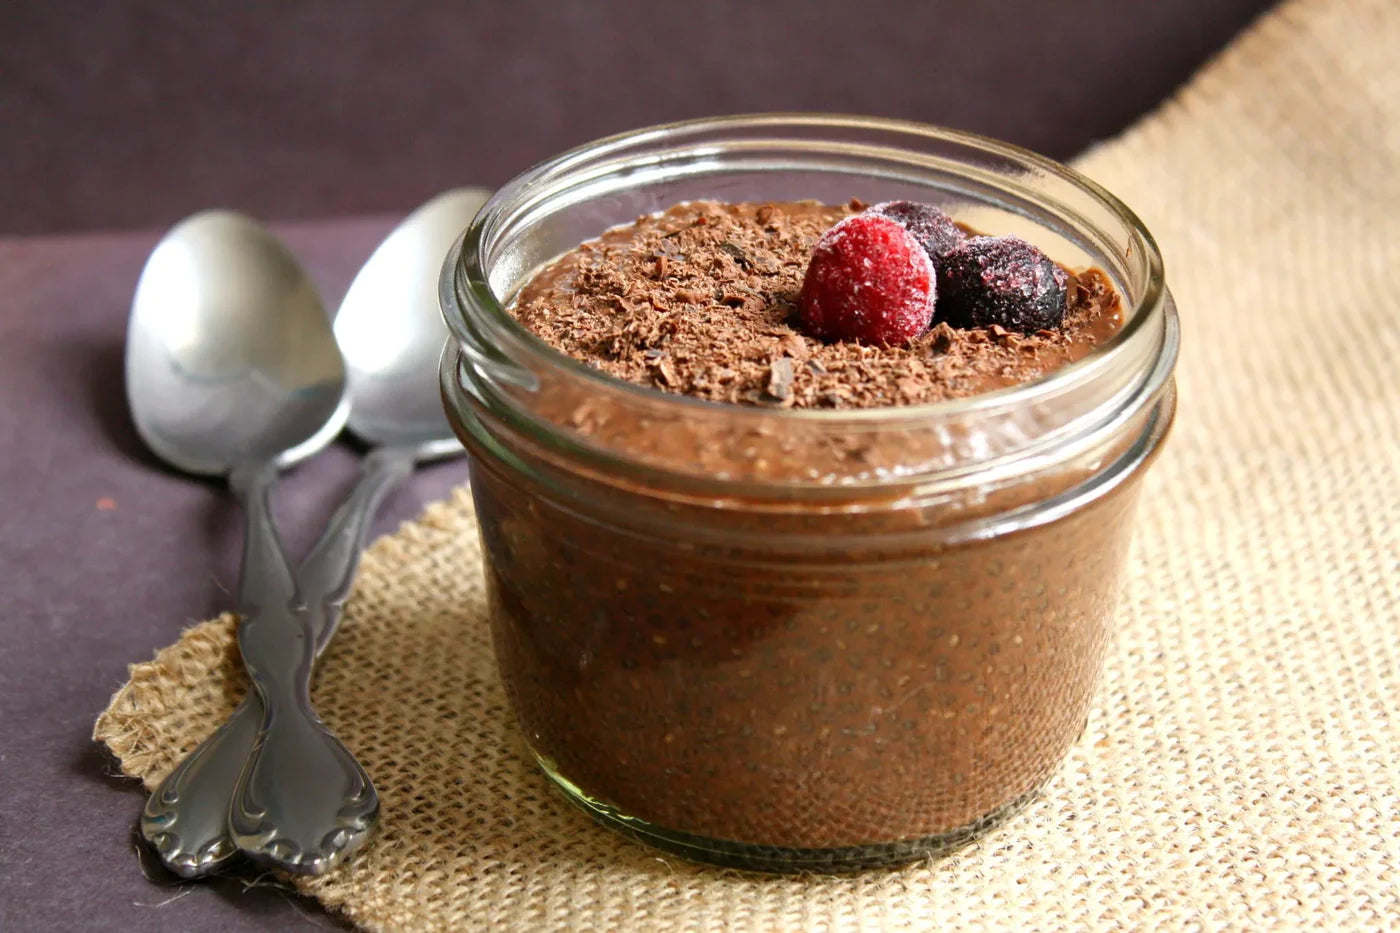 Healthy chocolate flavored chia pudding 🍫